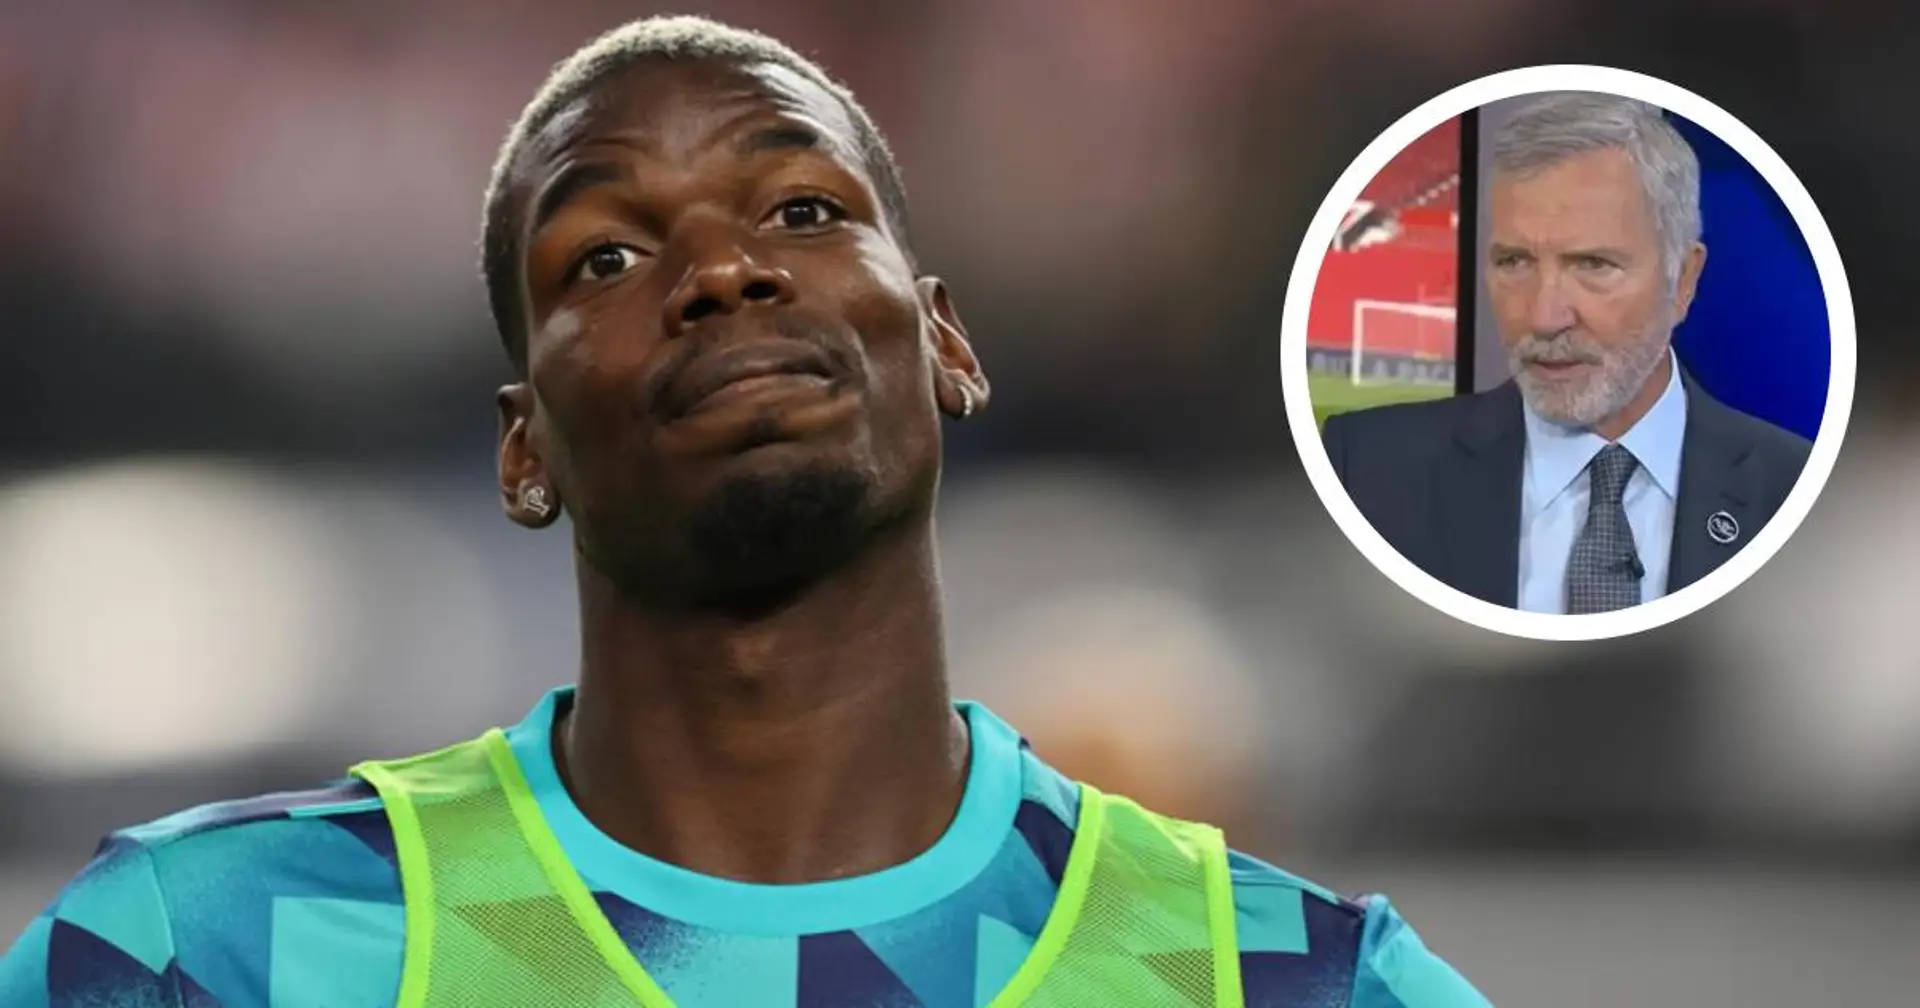 'I was right': Graeme Souness reacts to Paul Pogba's doping ban